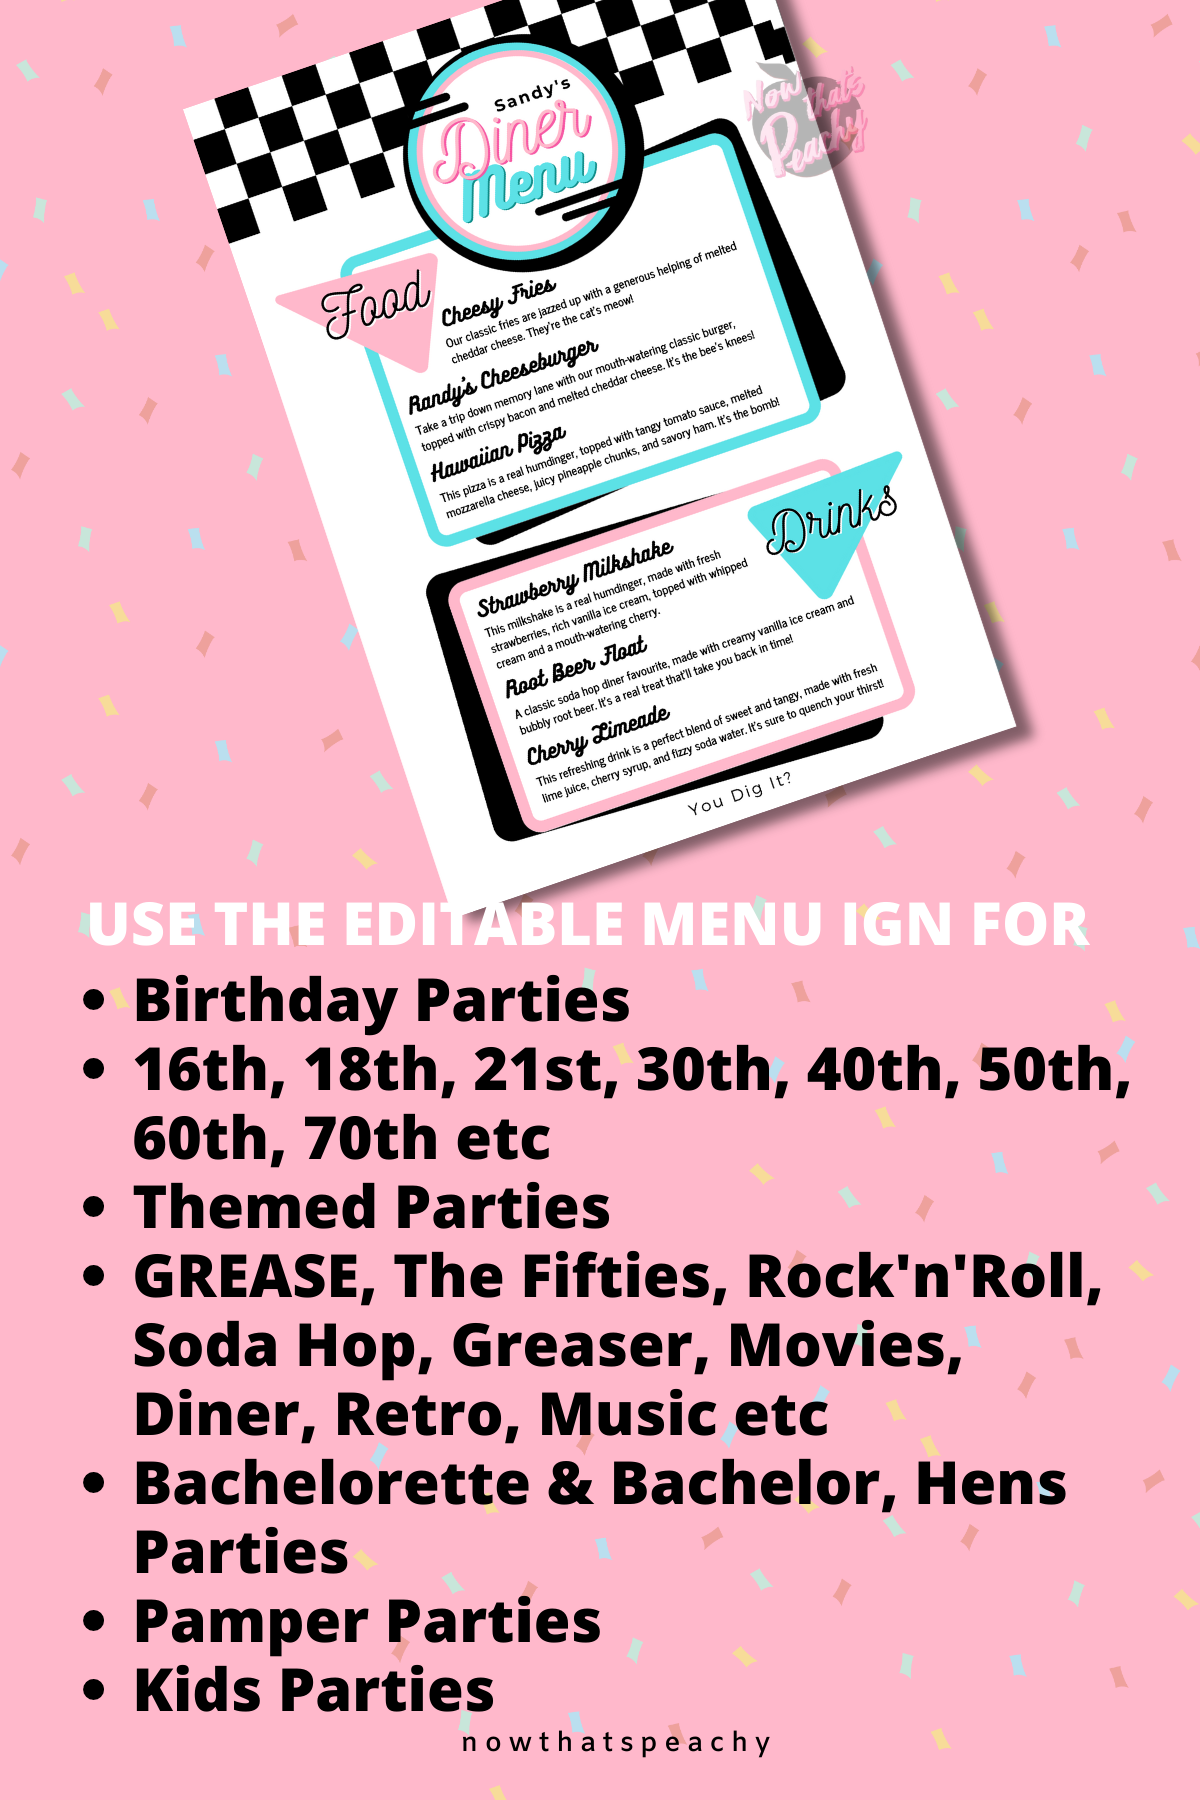 Custom DINER 50's Food Menu Party PRINTABLE, Rock'n'roll Soda Pop Retro 1950s poster Birthday fifties personalised customized editable decorations Grease Sock Hop Route 66 greaser fifties rocknroll themed birthday Canva edit print off digital download